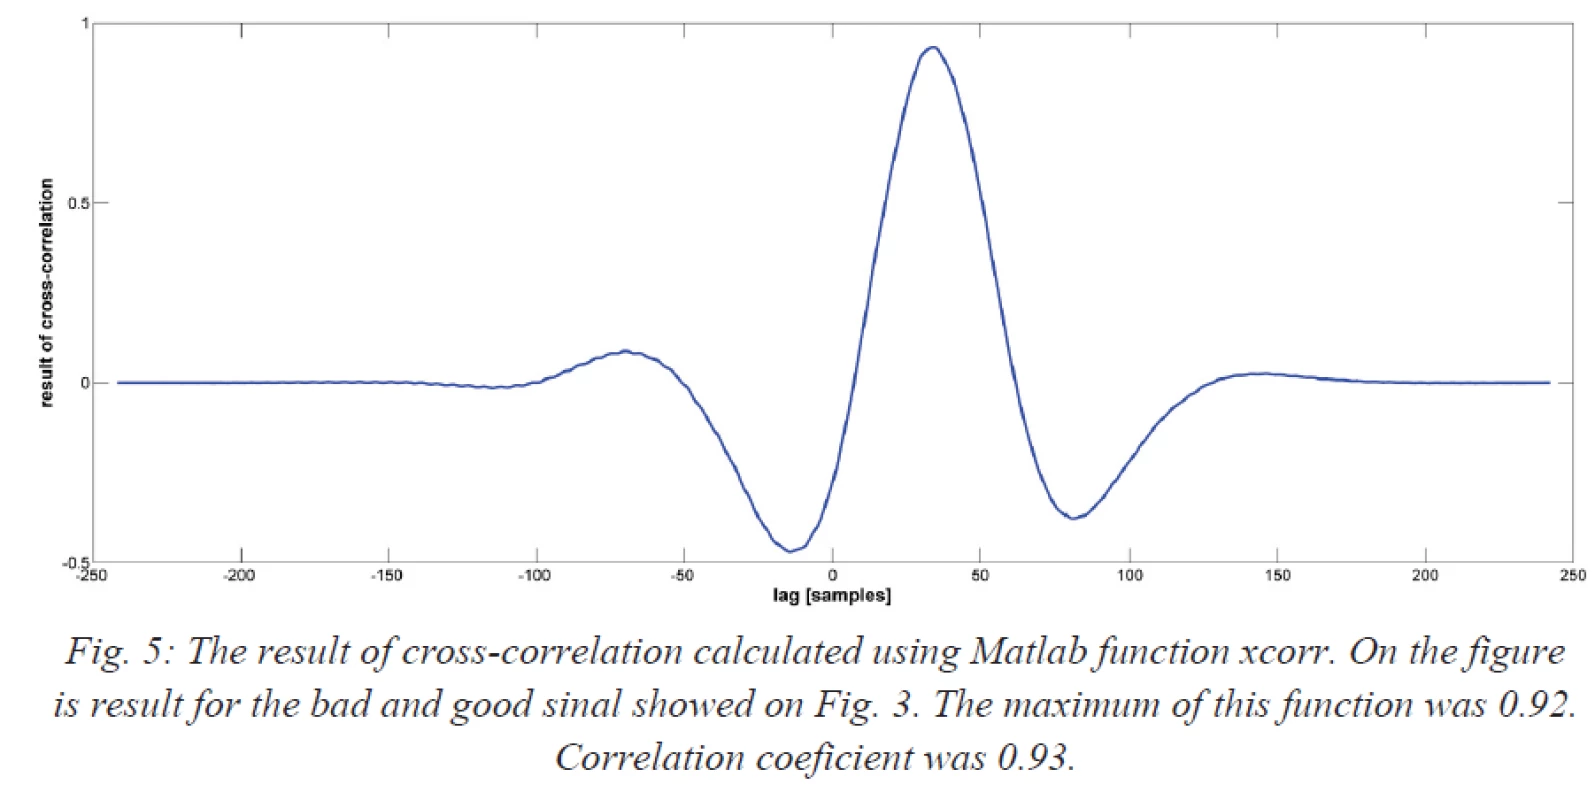 The result of cross-correlation calculated using Matlab function xcorr. On the figure is result for the bad and good sinal showed on Fig. 3. The maximum of this function was 0.92. Correlation coeficient was 0.93.